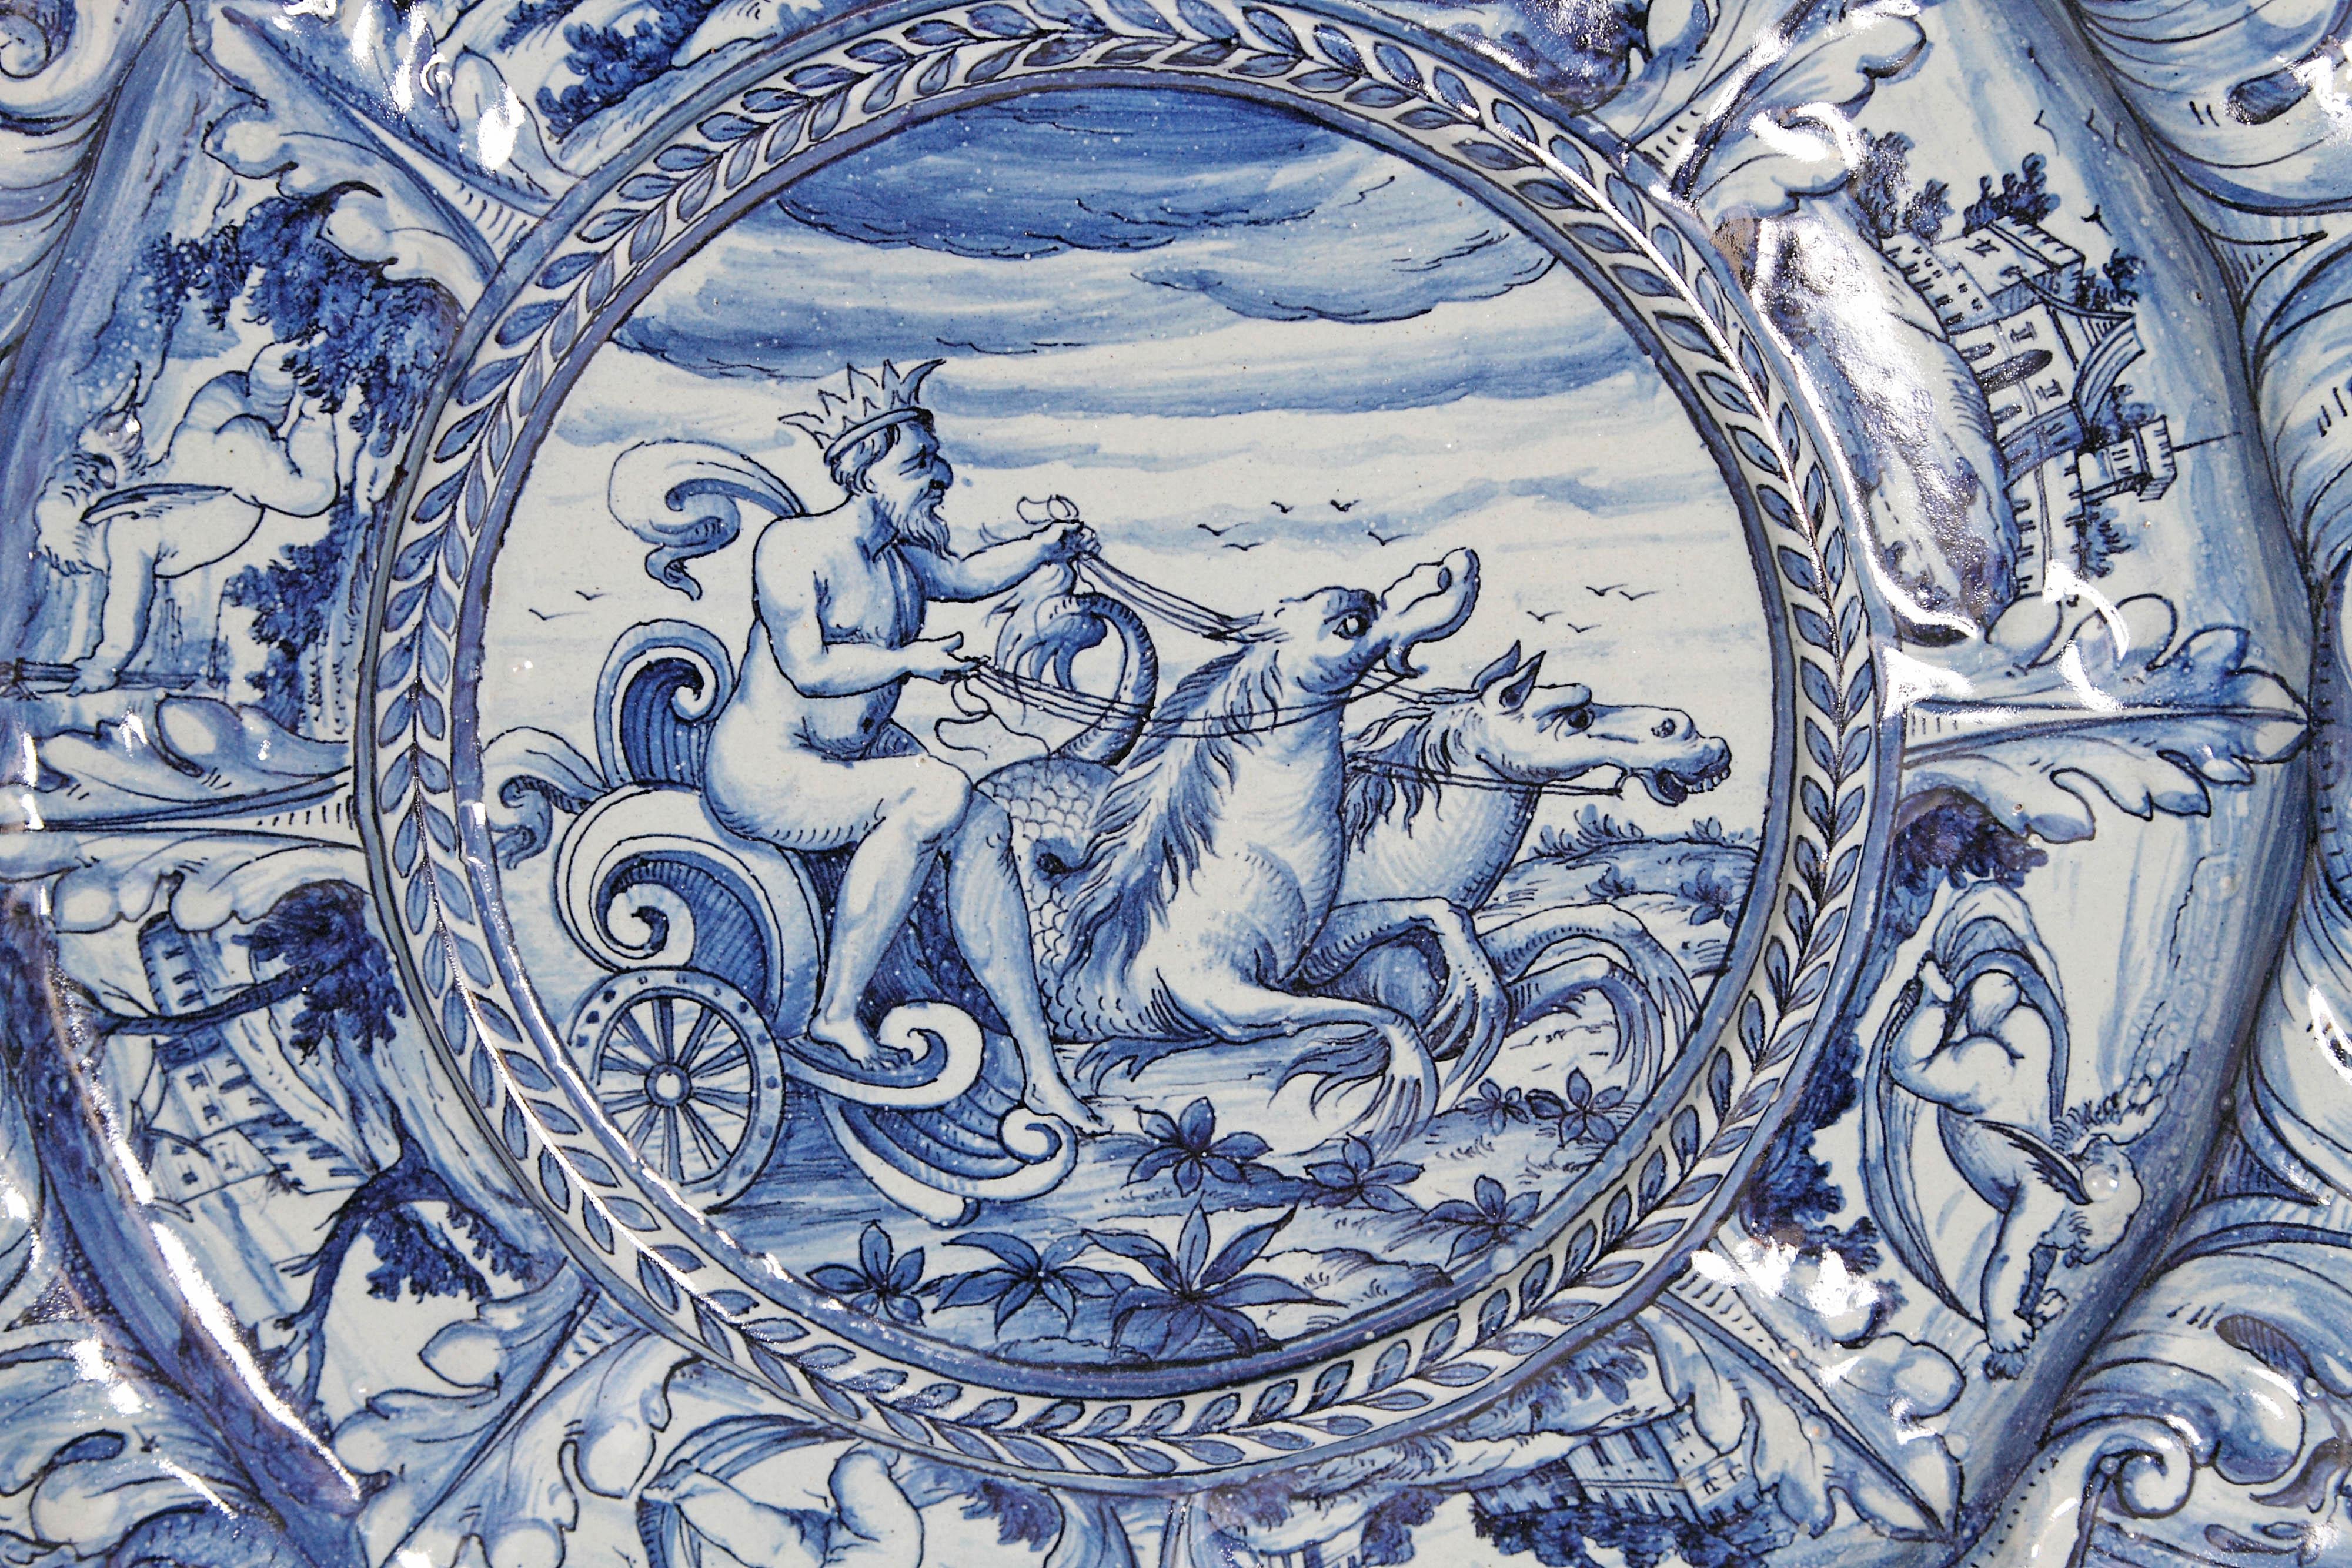 A large blue and white delft Faience charger. An elaborately shaped exterior rim surrounding a circle of alternating putti and castles. The center has a rimmed circle containing a scene of Neptune and his chariot, mid-19th century, Italy.